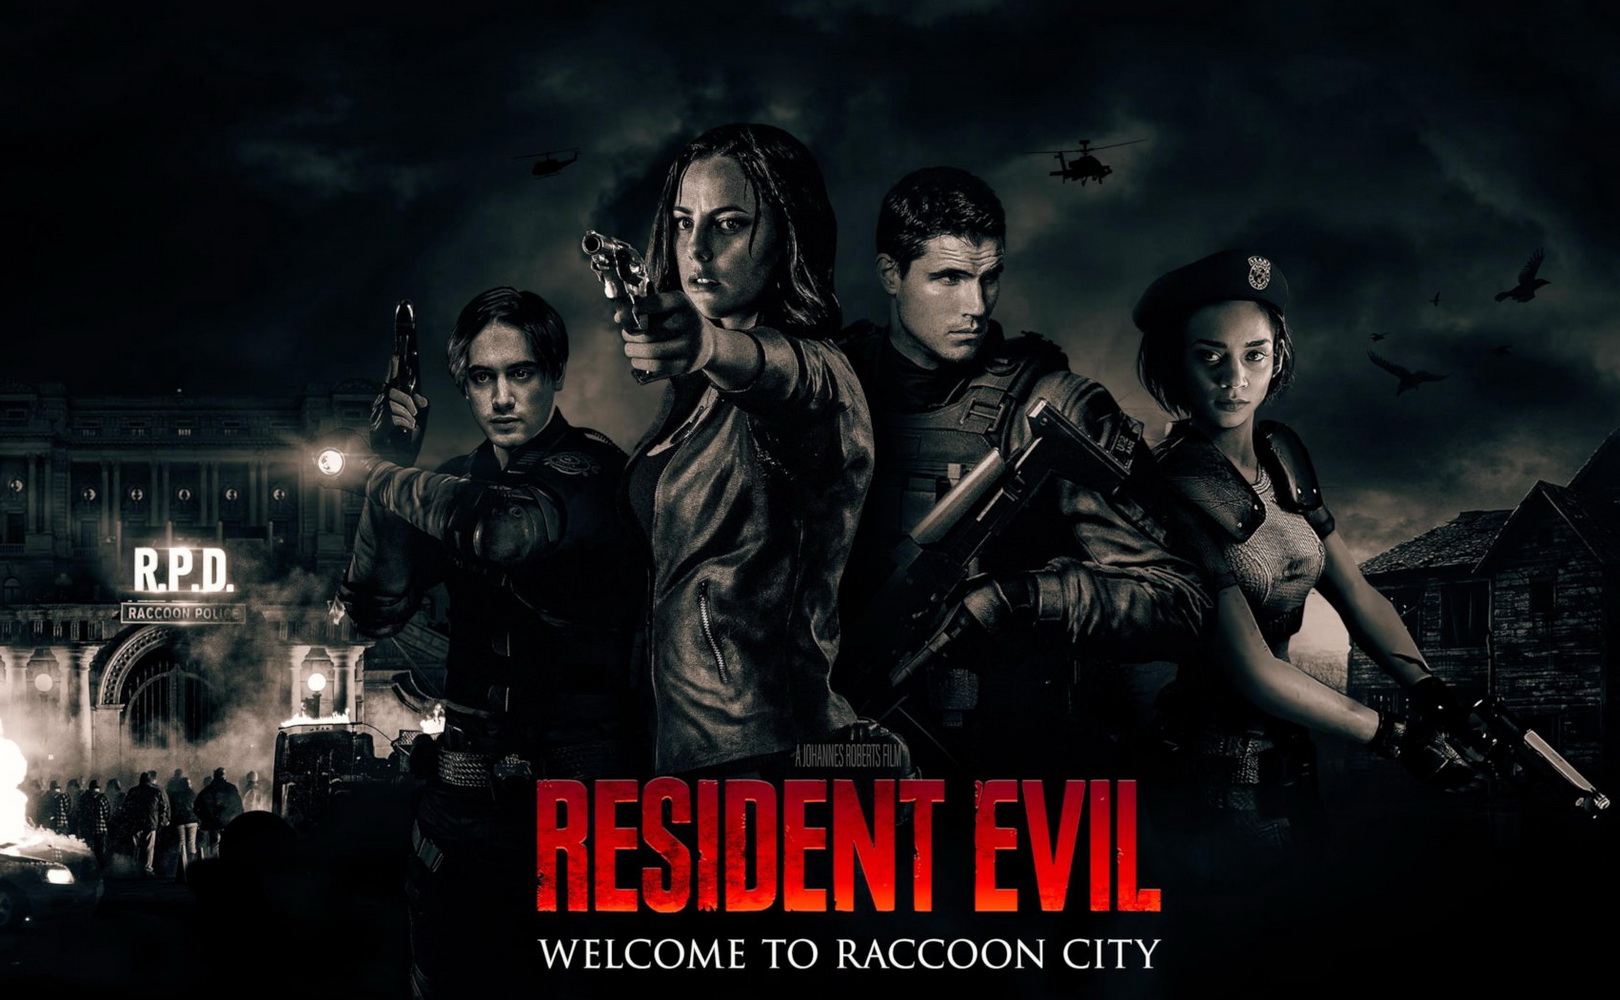 I have been waiting for such a mod for the game for a long time!  Resident Evil review: Welcome to Raccoon City